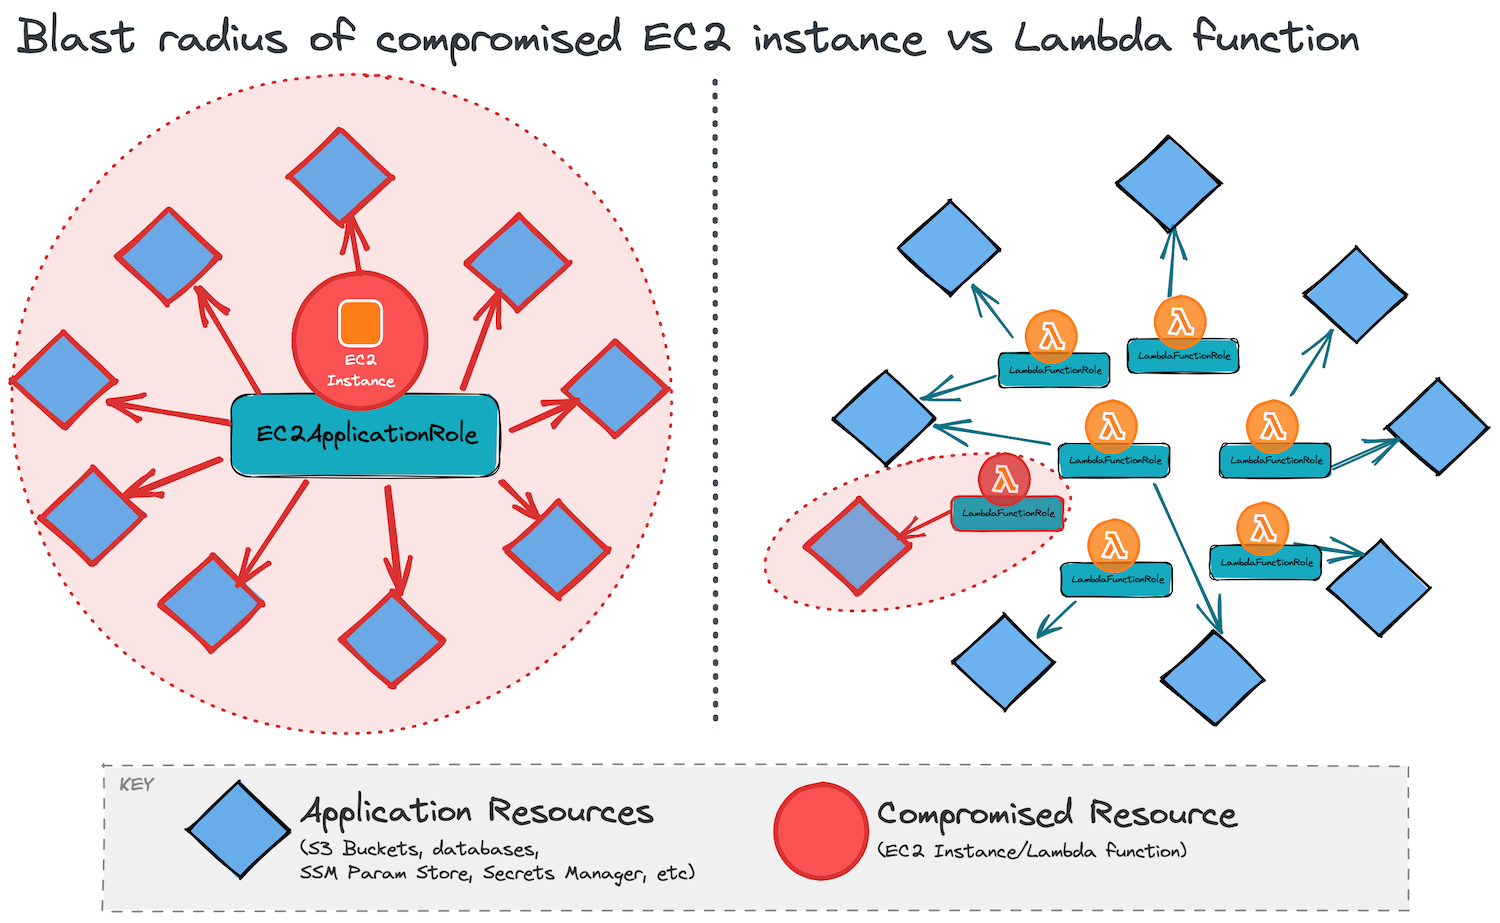 Blast radius of compromised EC2 instance vs that of Lambda functions with their own IAM roles